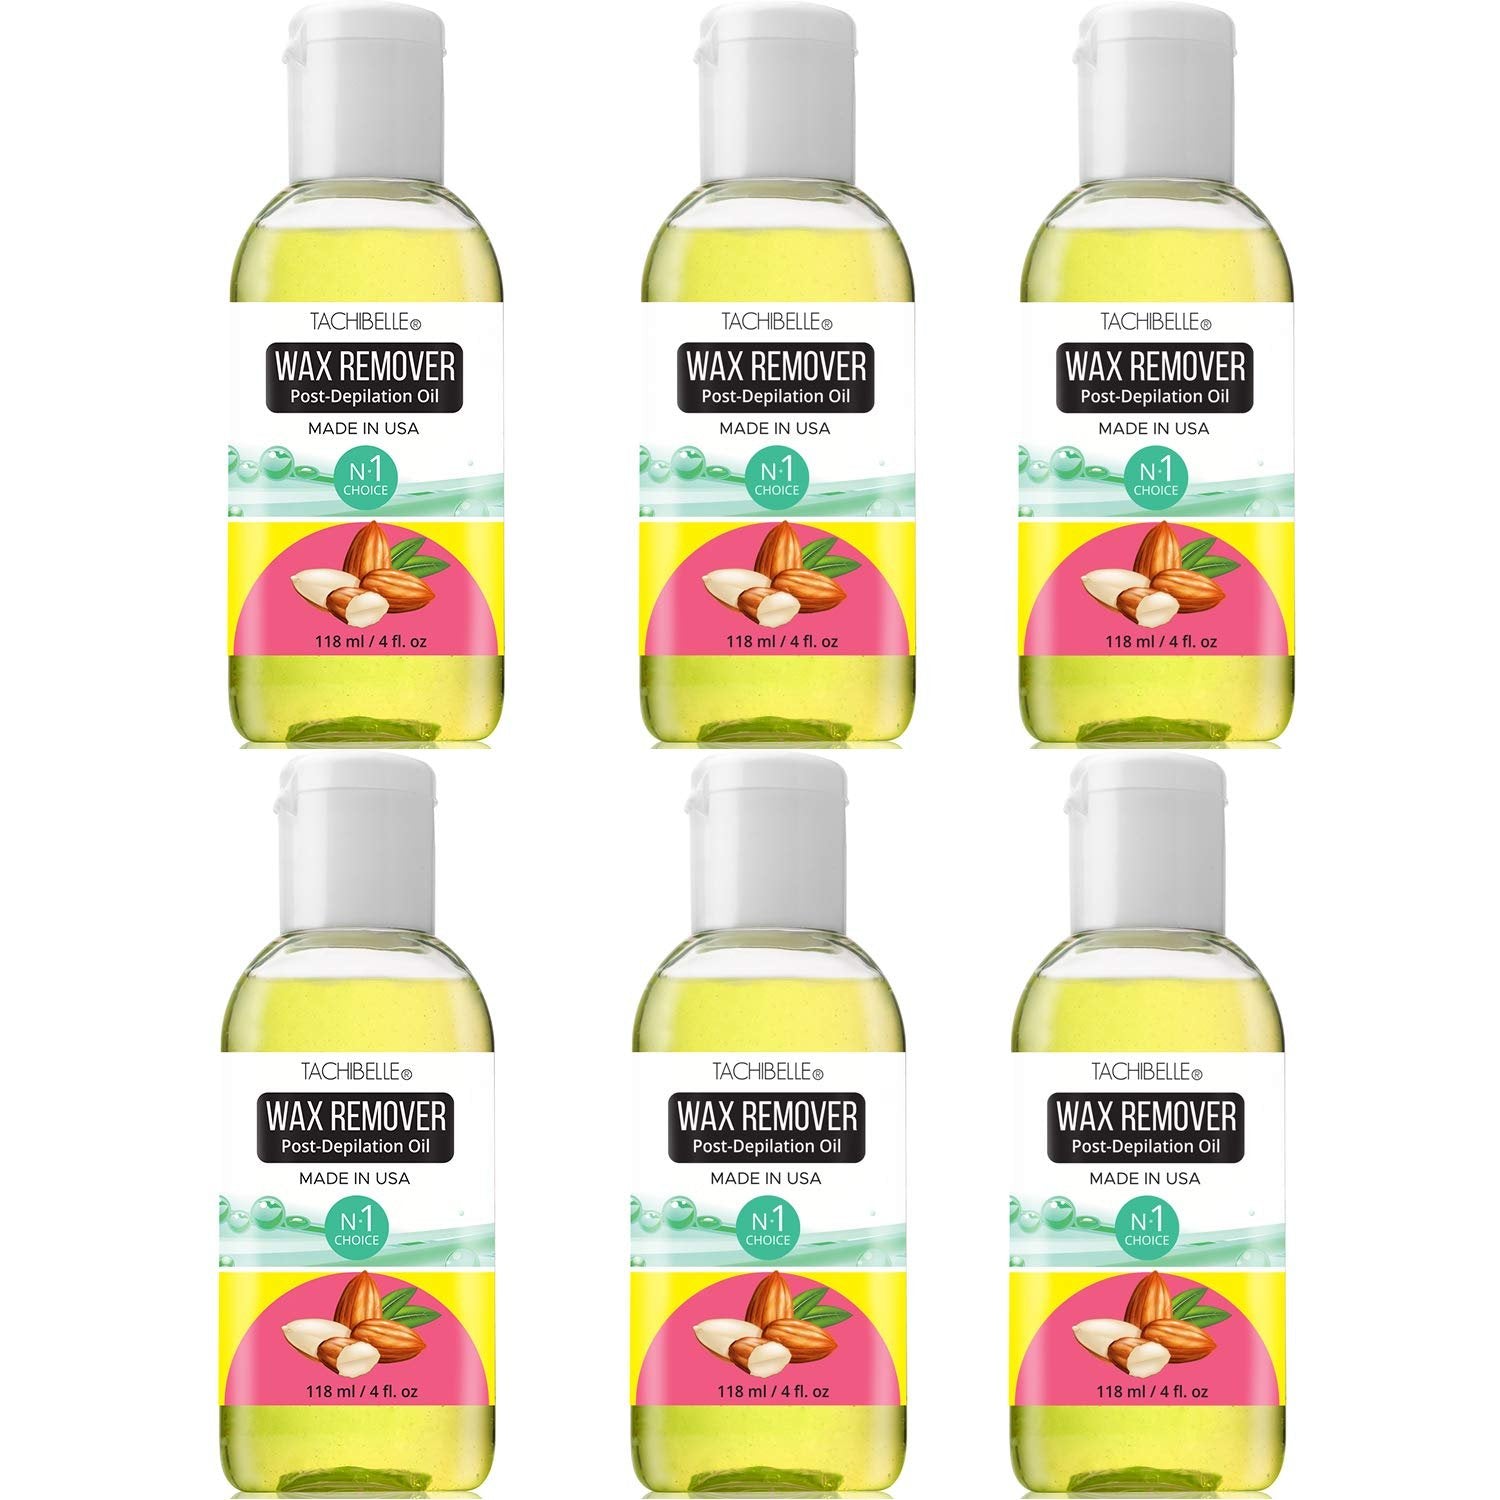 Tachibelle Wax Remover Post-Depilation Oil Enriched with Almond Oil Wax Off Remove After Wax Residue Remove Oil for SKIN MADE IN USA 4 OZ (6 Pieces)